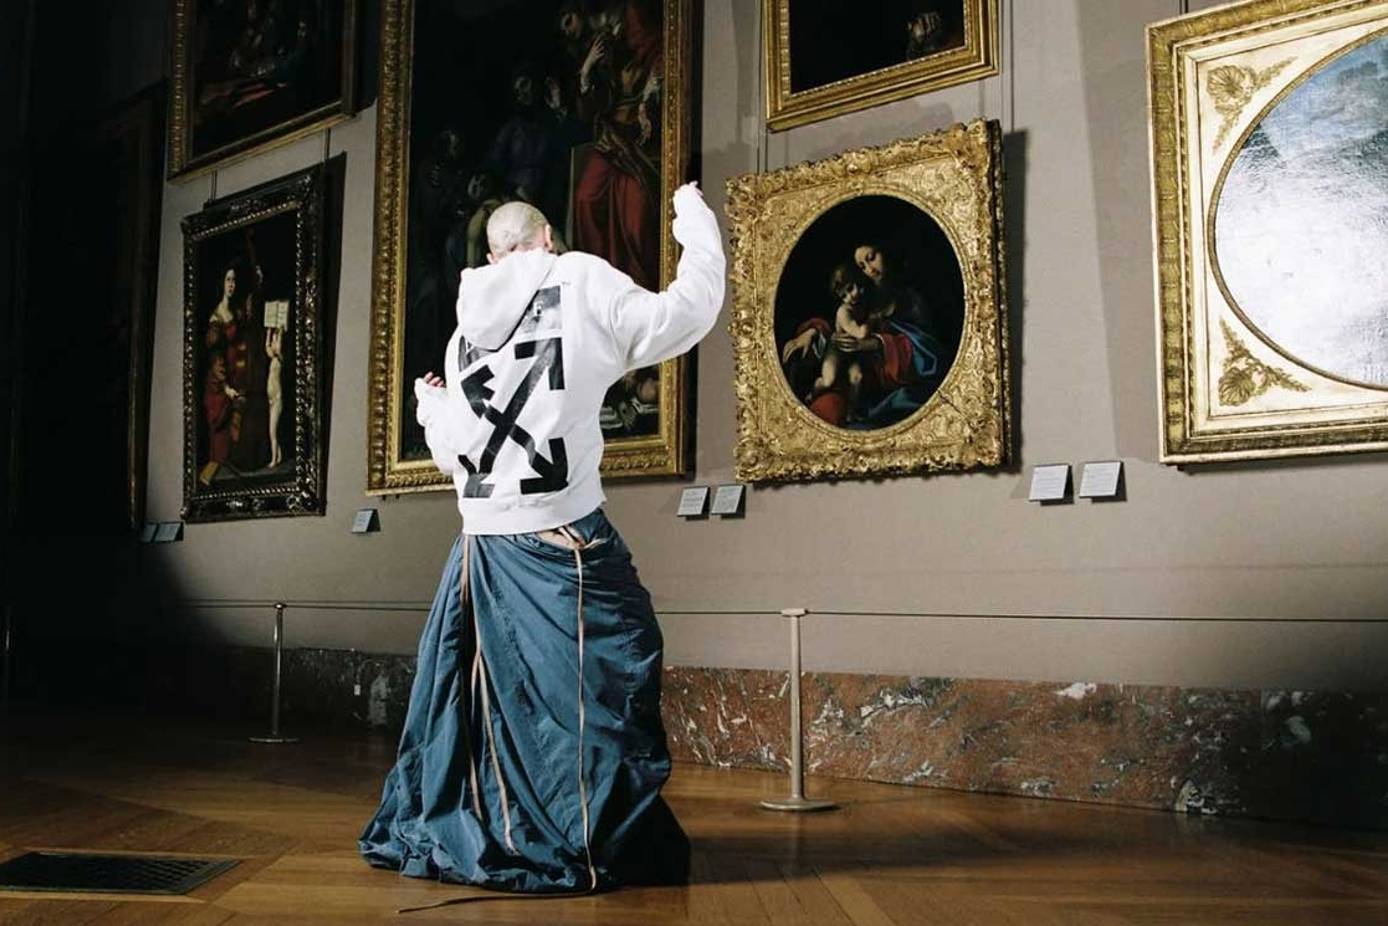 Virgil Abloh on Iconic PFW Photo With Kanye: 'What May Seemingly